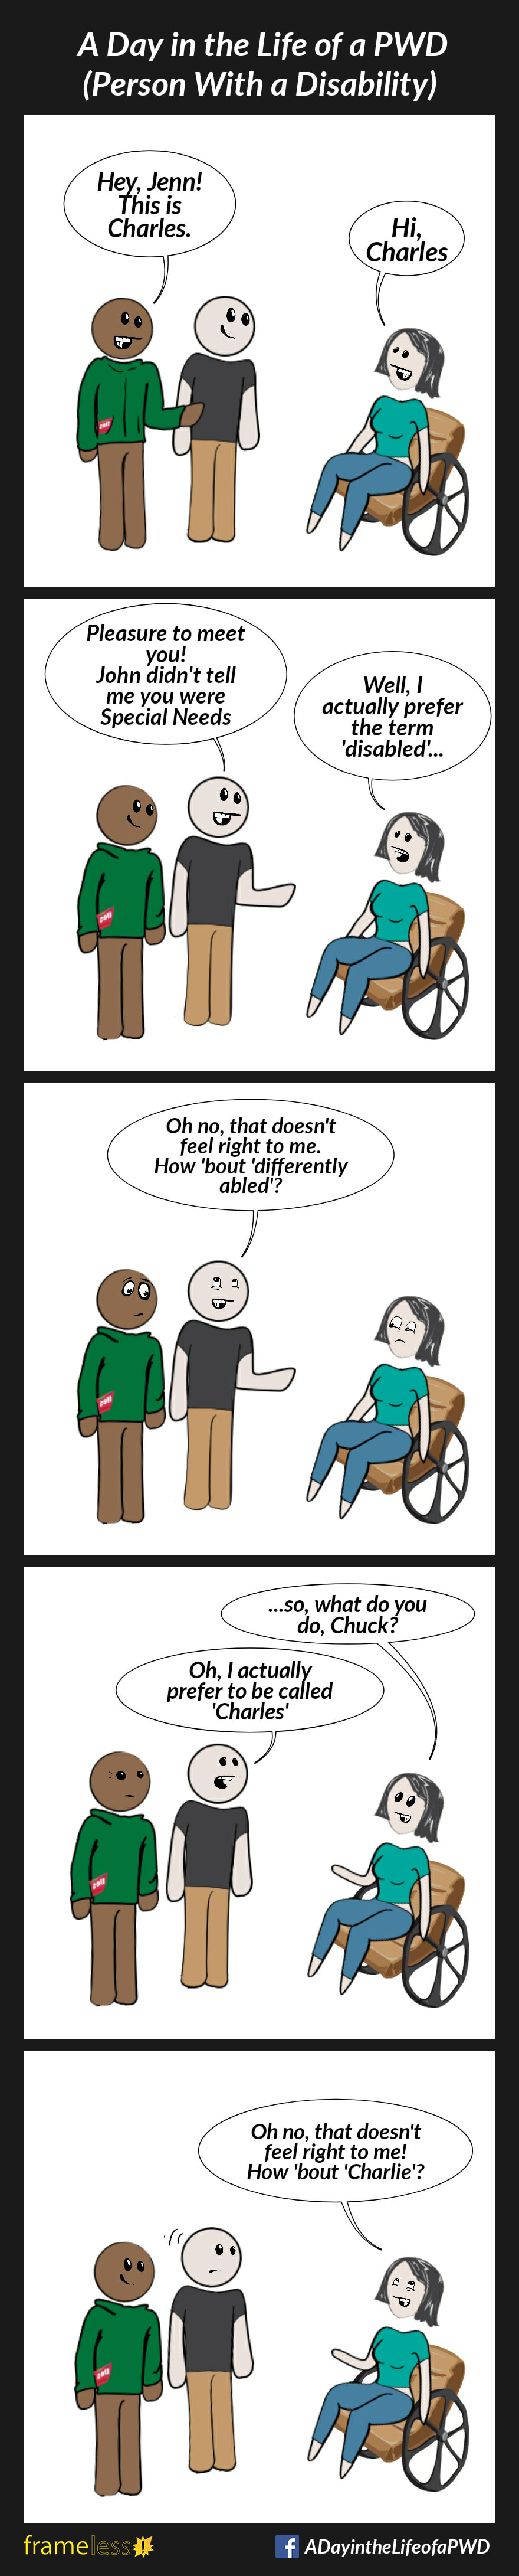 COMIC STRIP 
A Day in the Life of a PWD (Person With a Disability) 

Frame 1:
Jenn, who uses a wheelchair, is approached by her friend, John, and another man.
JOHN: Hey, Jenn! This is Charles.
JENN: Hi, Charles

Frame 2:
CHARLES: Pleasure to meet you! John didn't tell me you are Special Needs 
JENN: Well, I actually prefer the term 'disabled'

Frame 3:
CHARLES: Oh no, that doesn't feel right to me. How 'bout 'differently abled'?
Jenn looks at him and doesn't respond.

Frame 4:
JENN: ...so, what do you do, Chuck?
CHARLES: Oh, I actually prefer to be called Charles

Frame 5:
JENN: Oh no, that doesn't feel right to me! How 'bout 'Charlie'?